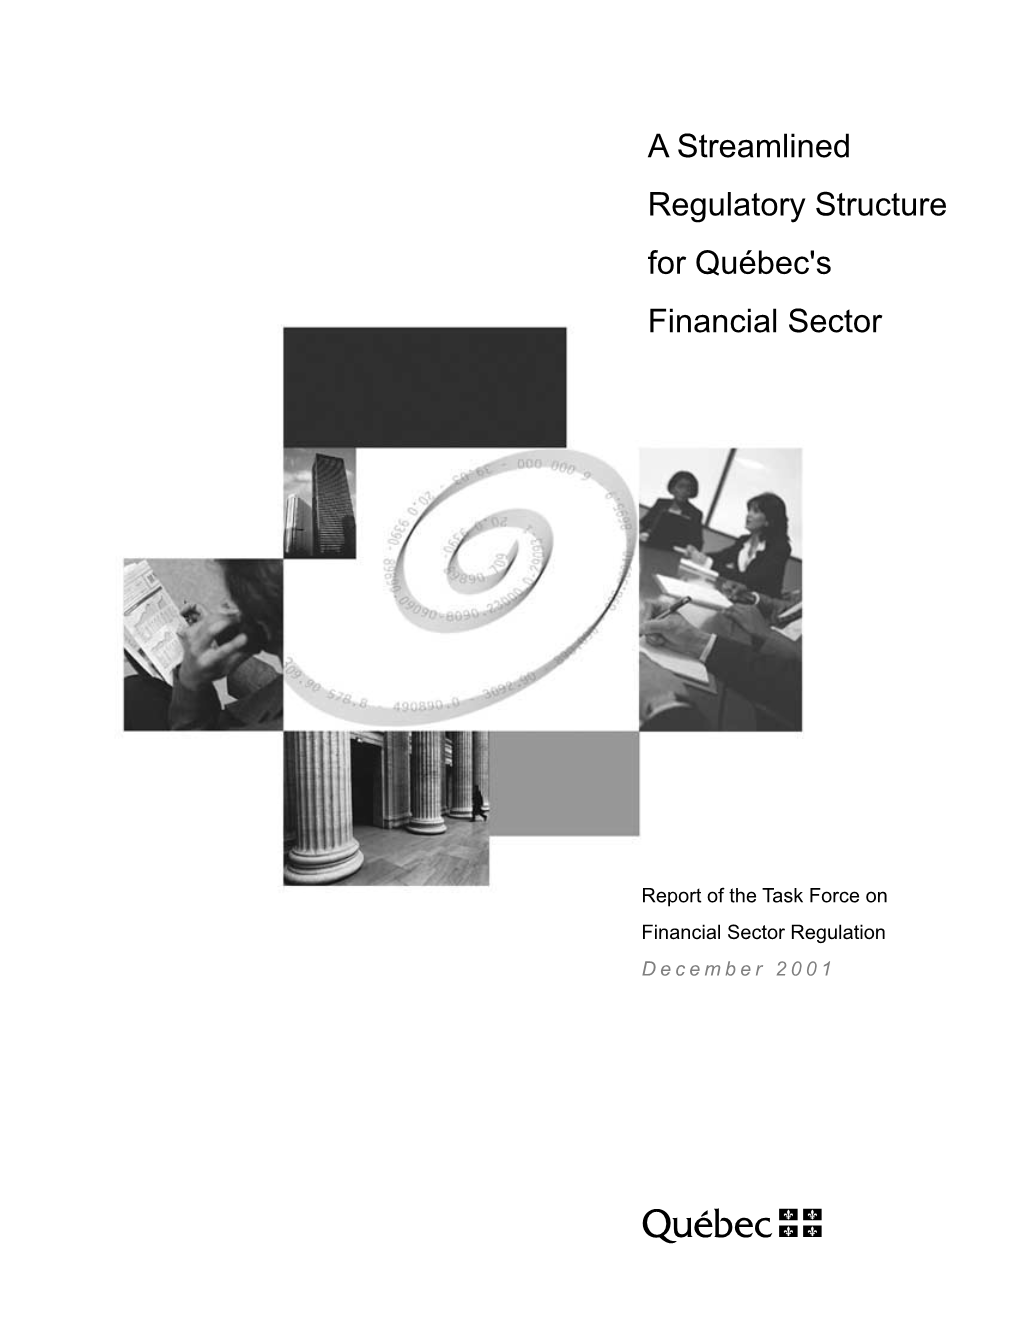 A Streamlined Regulatory Structure for Québec's Financial Sector